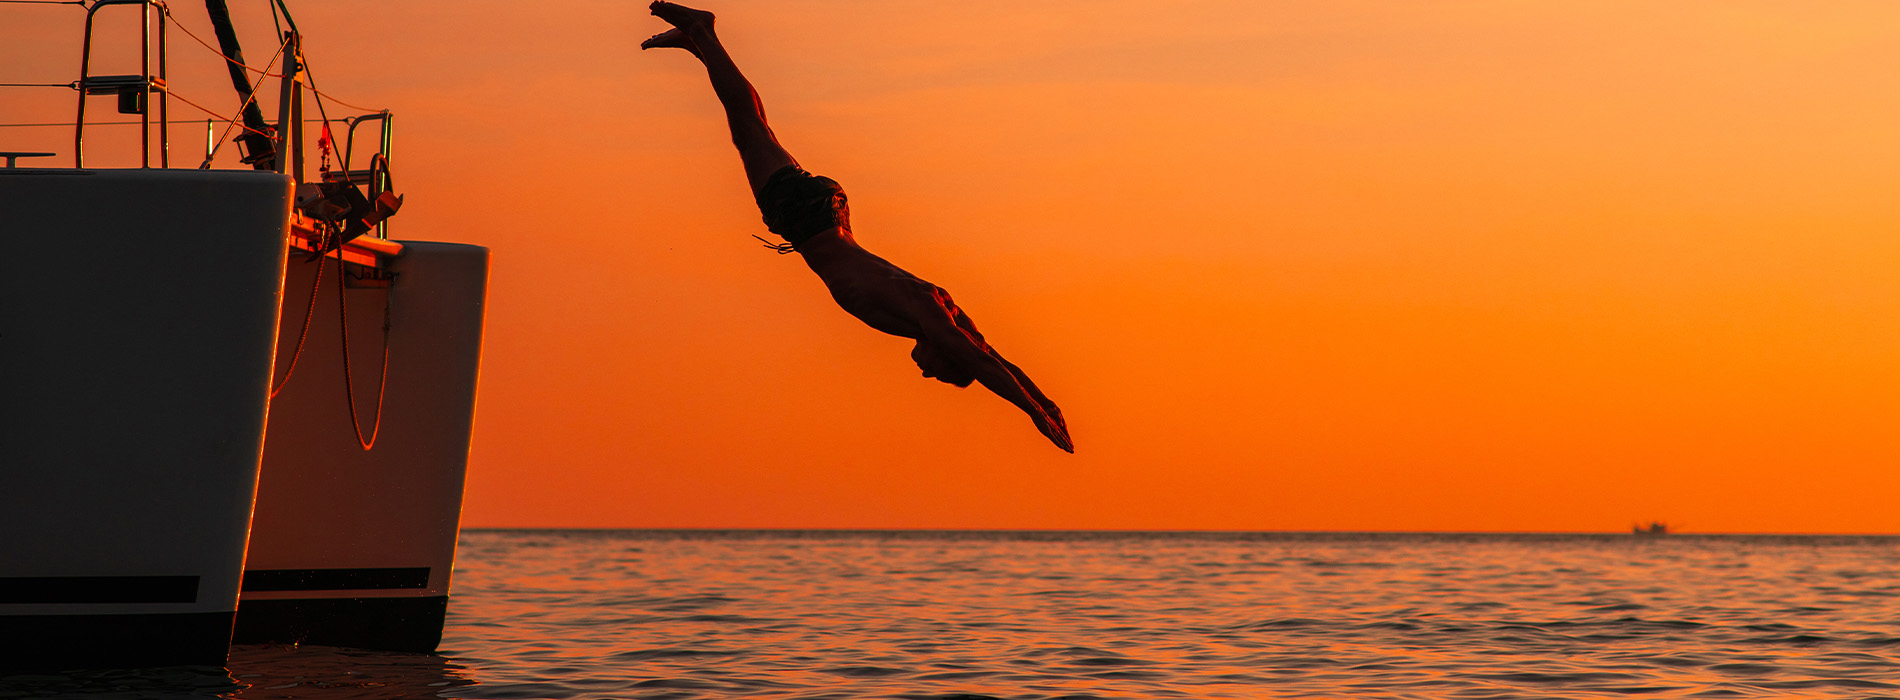 Take a leap: how to find a new niche in travel